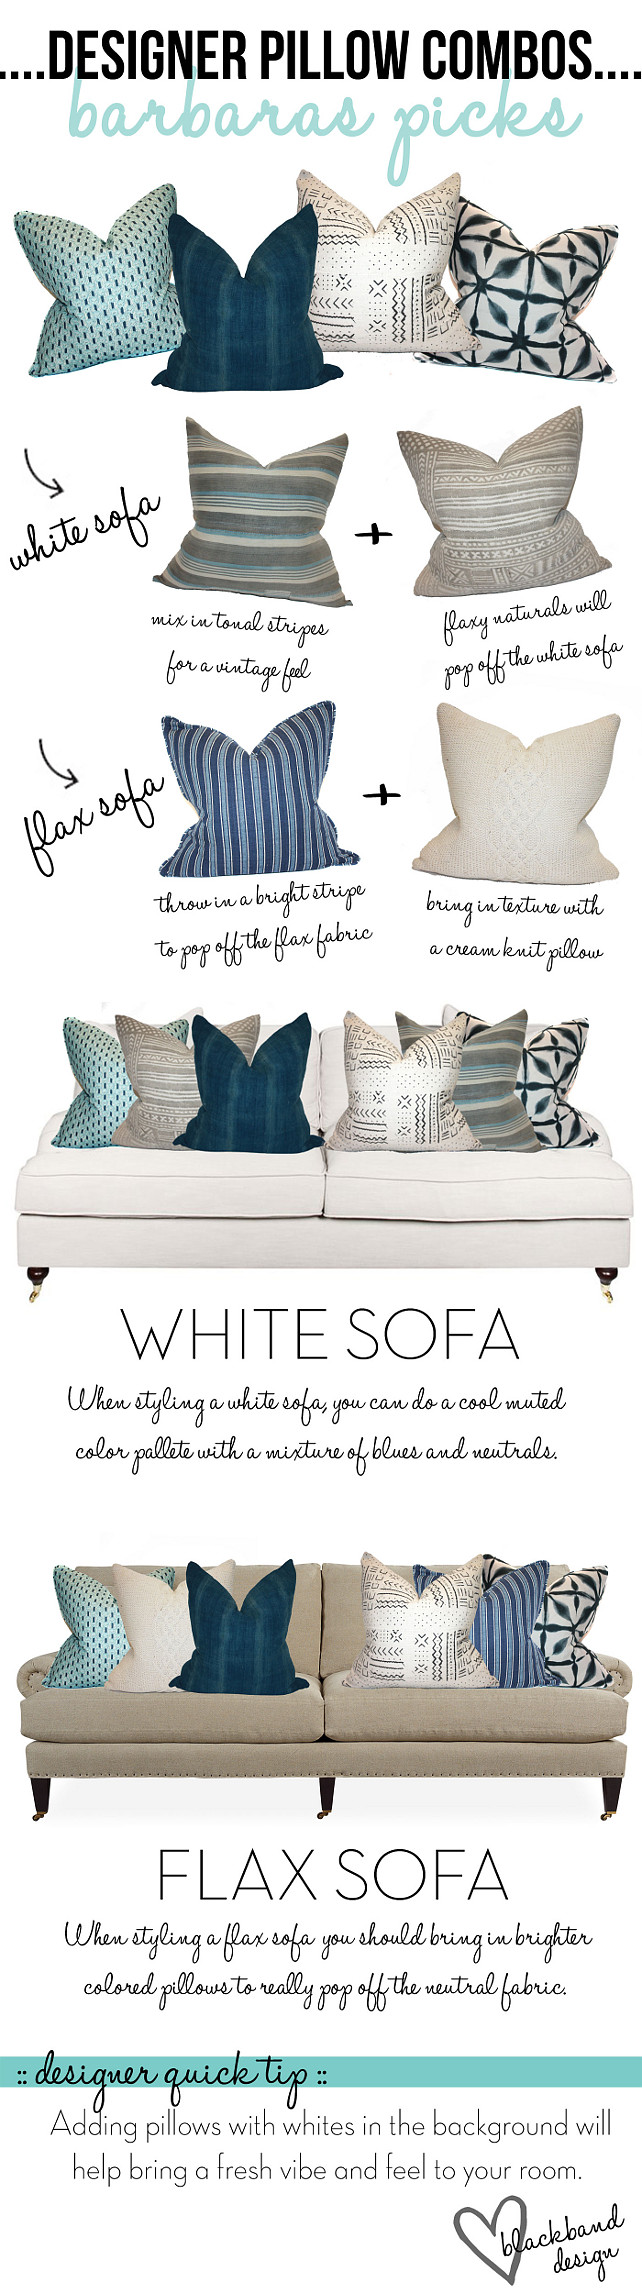 Designer Pillow Combos. Designer Pillow Combo Ideas. Perfect pillow combos for white sofa or flax sofa. #PillowCombos Blackband Design.